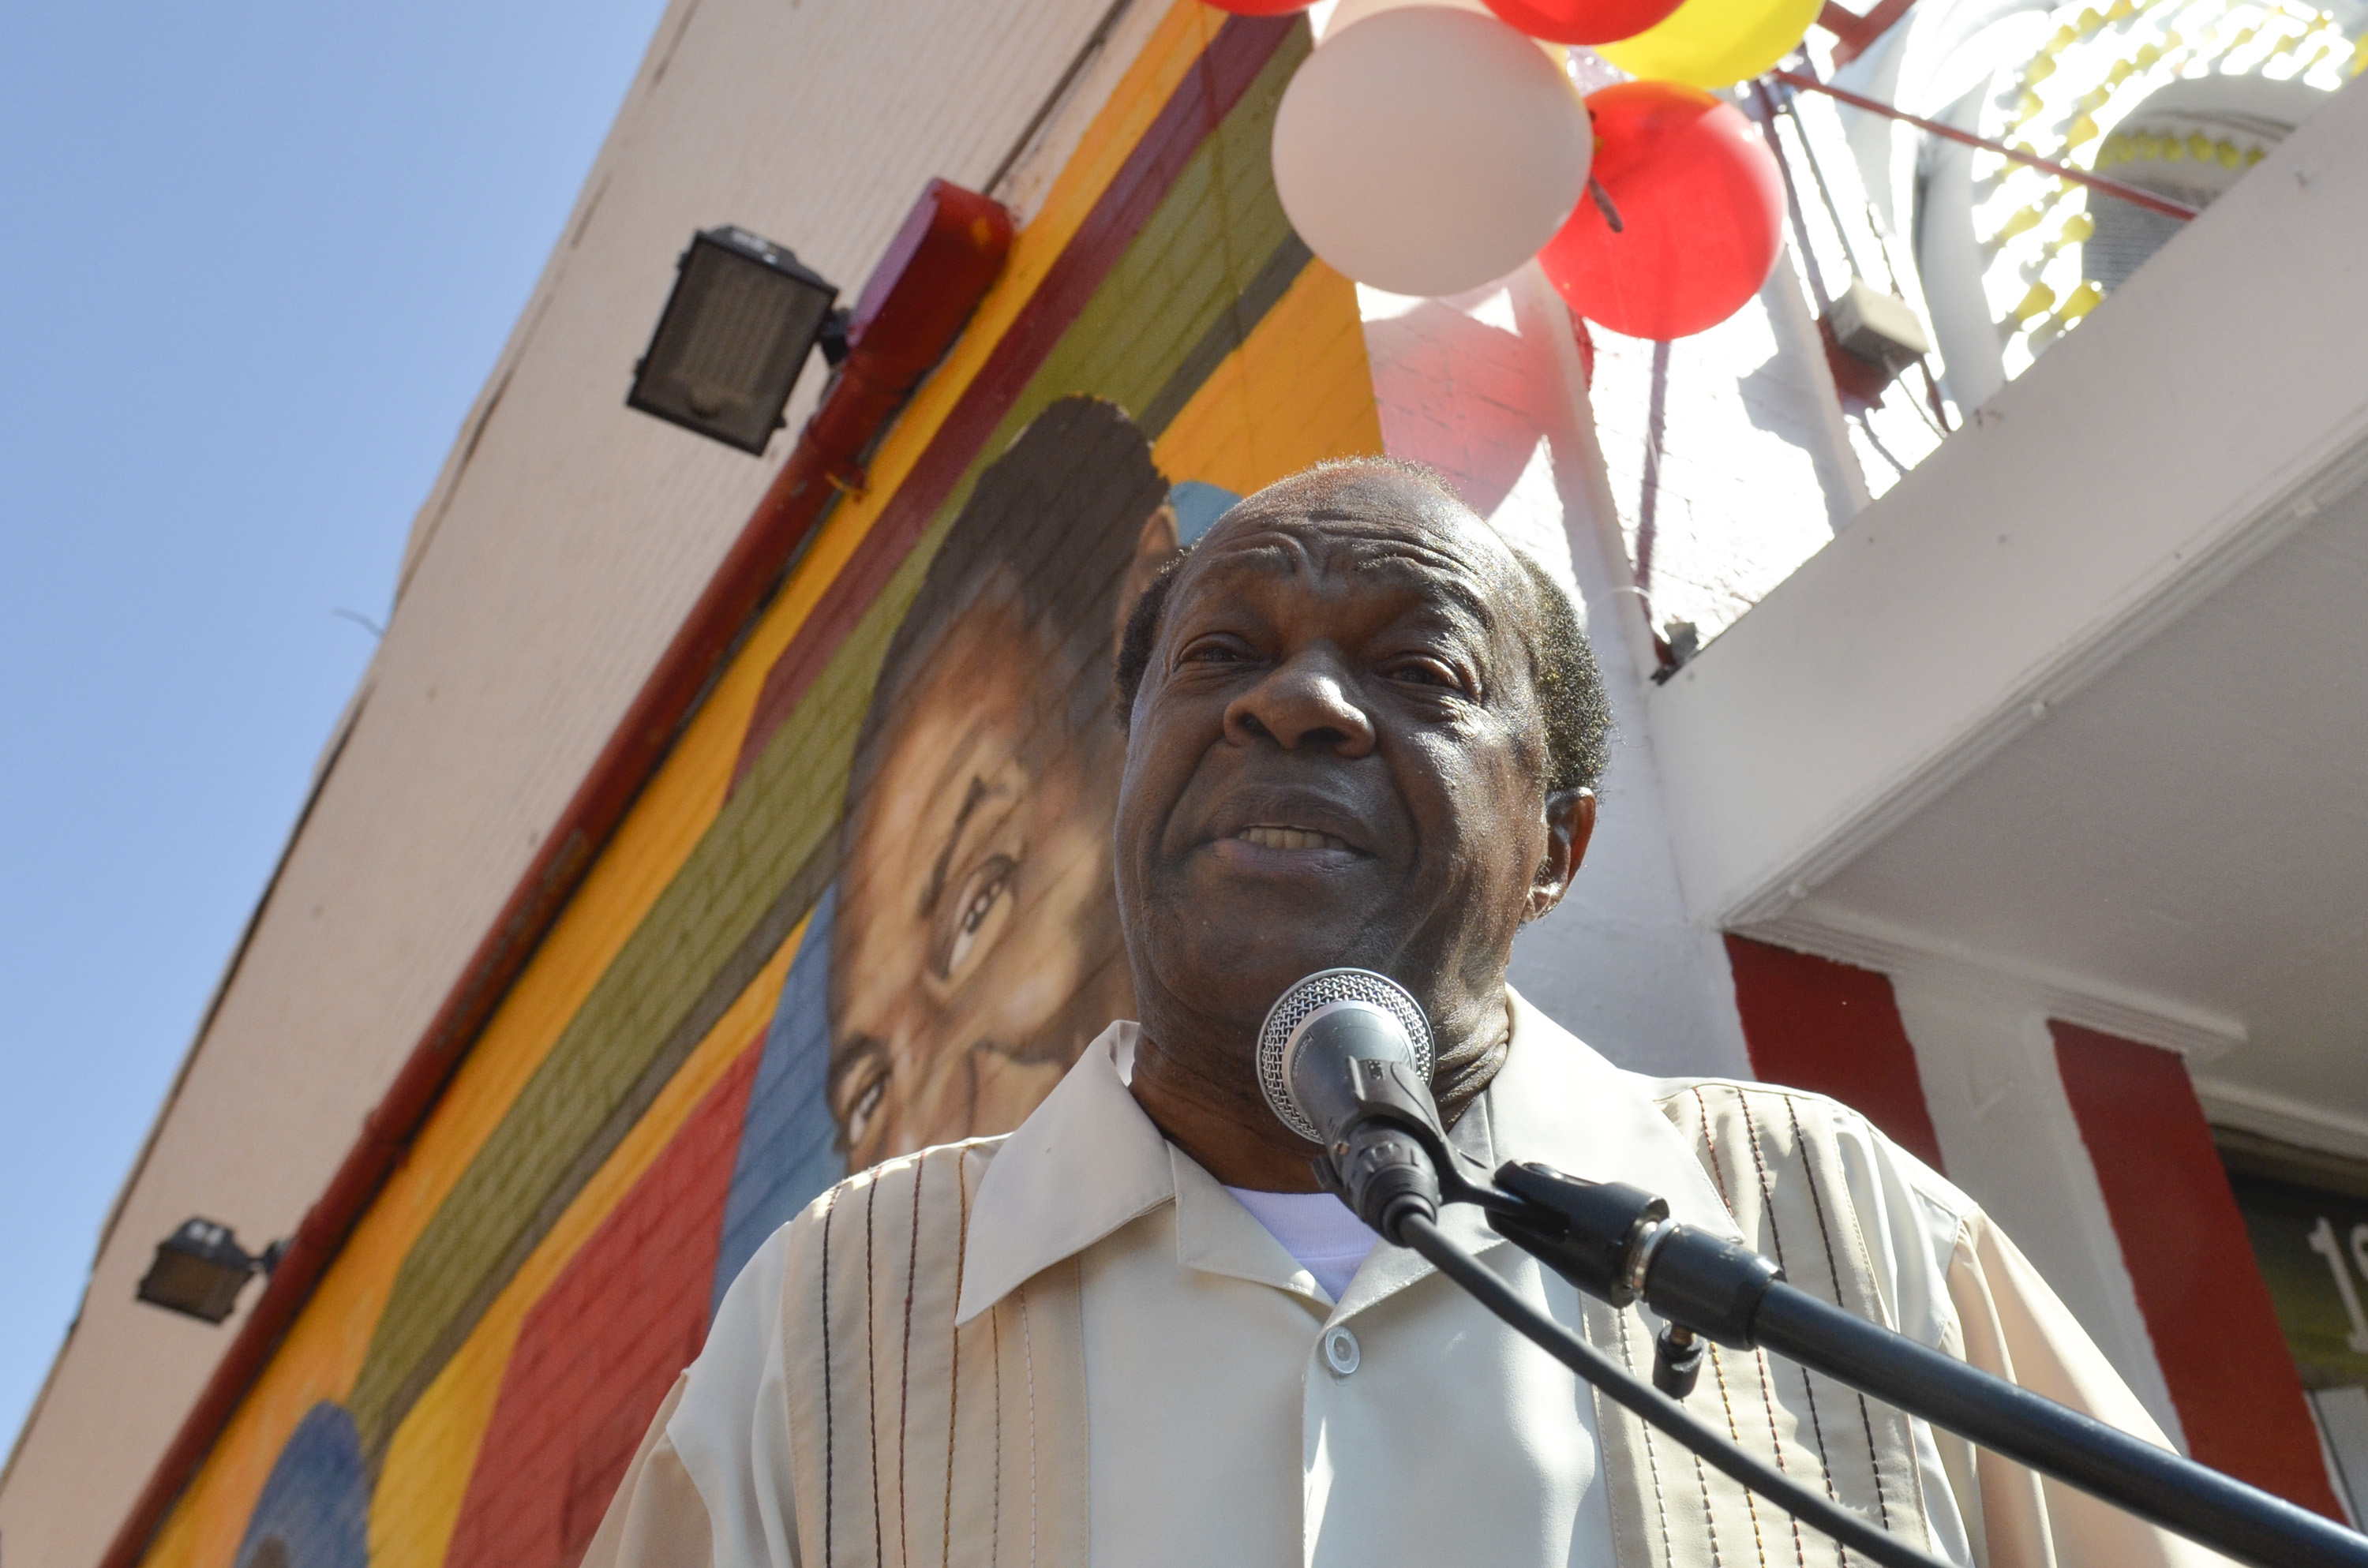 Marion Barry speaks during the 55th Anniversary of Ben's Chili Bowl on August 22, 2013 in Washington, DC. (Kris Connor—Getty Images)